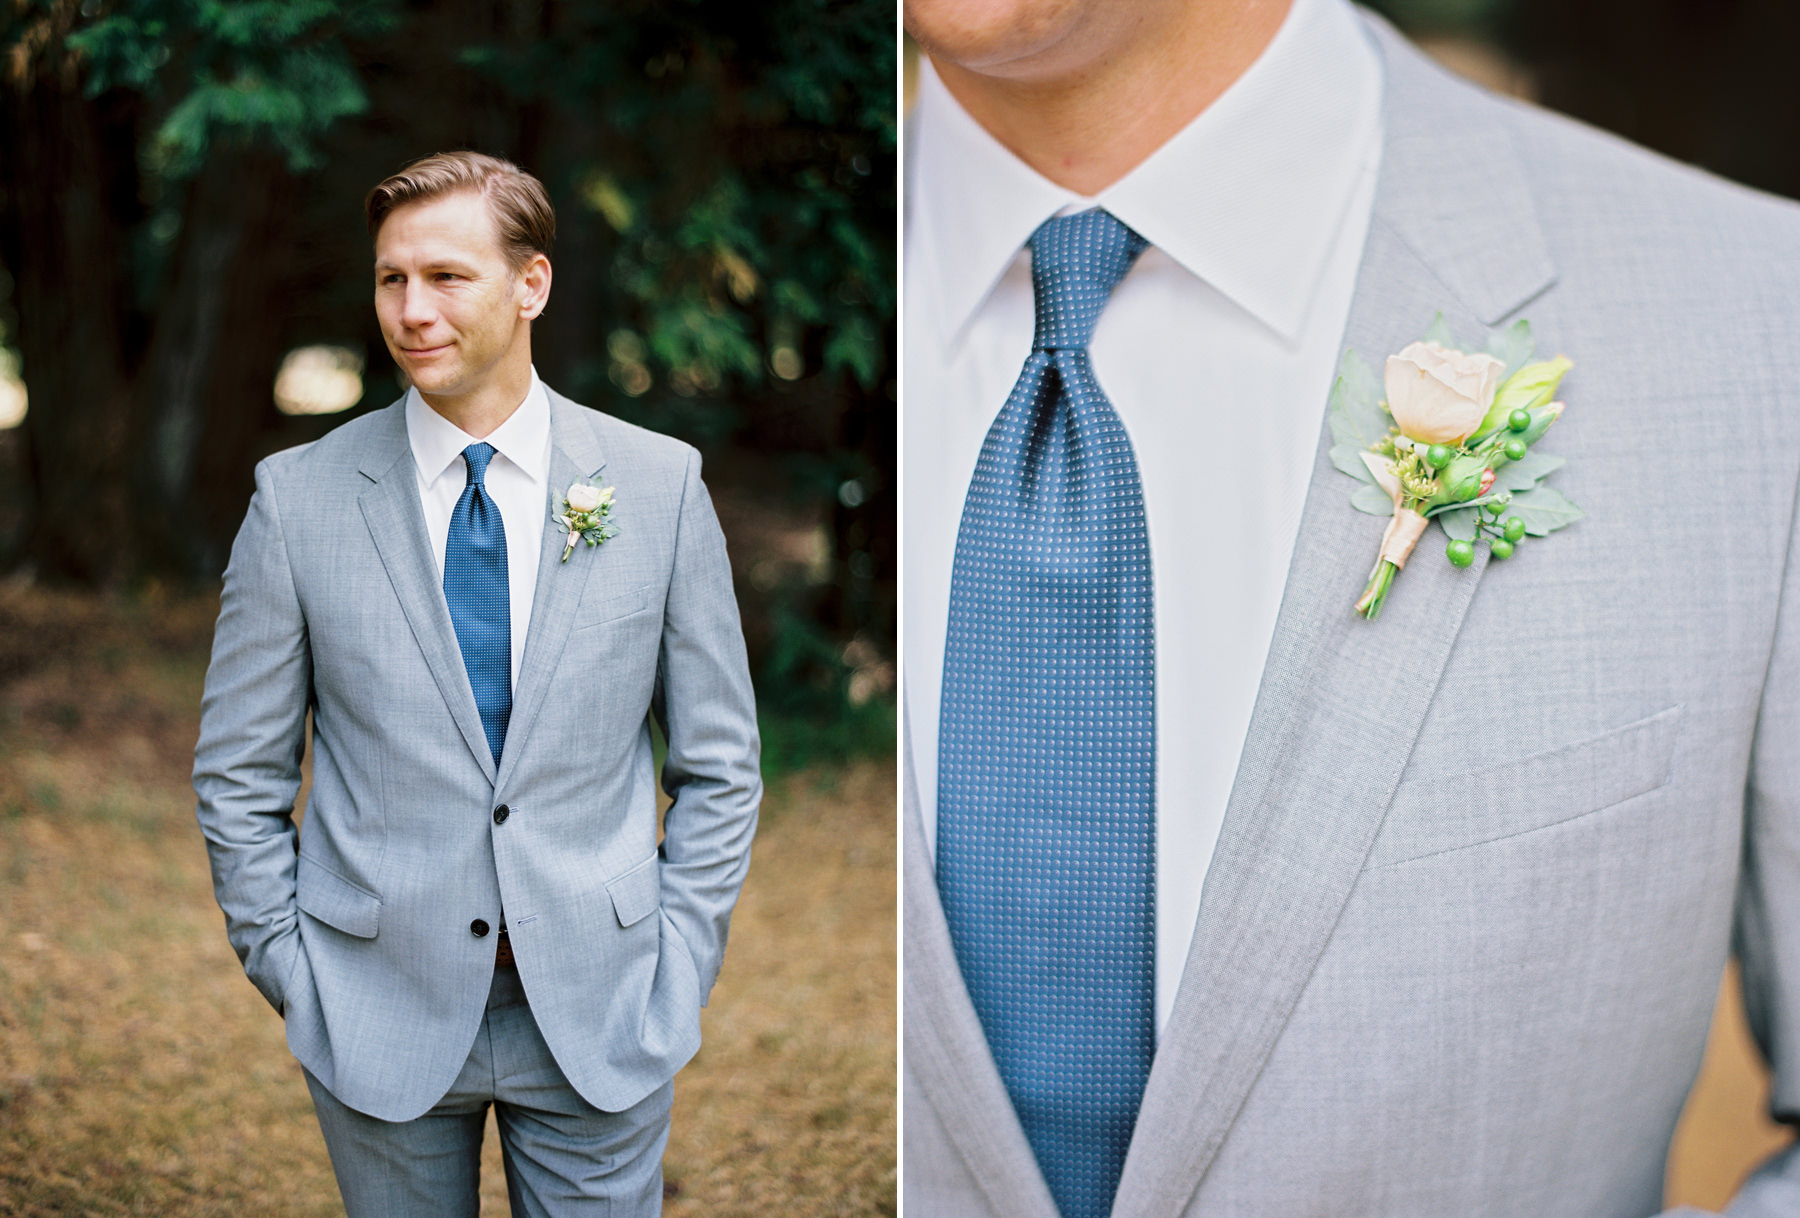 172-groom-in-a-light-grey-two-button-suit-on-portra-400.jpg